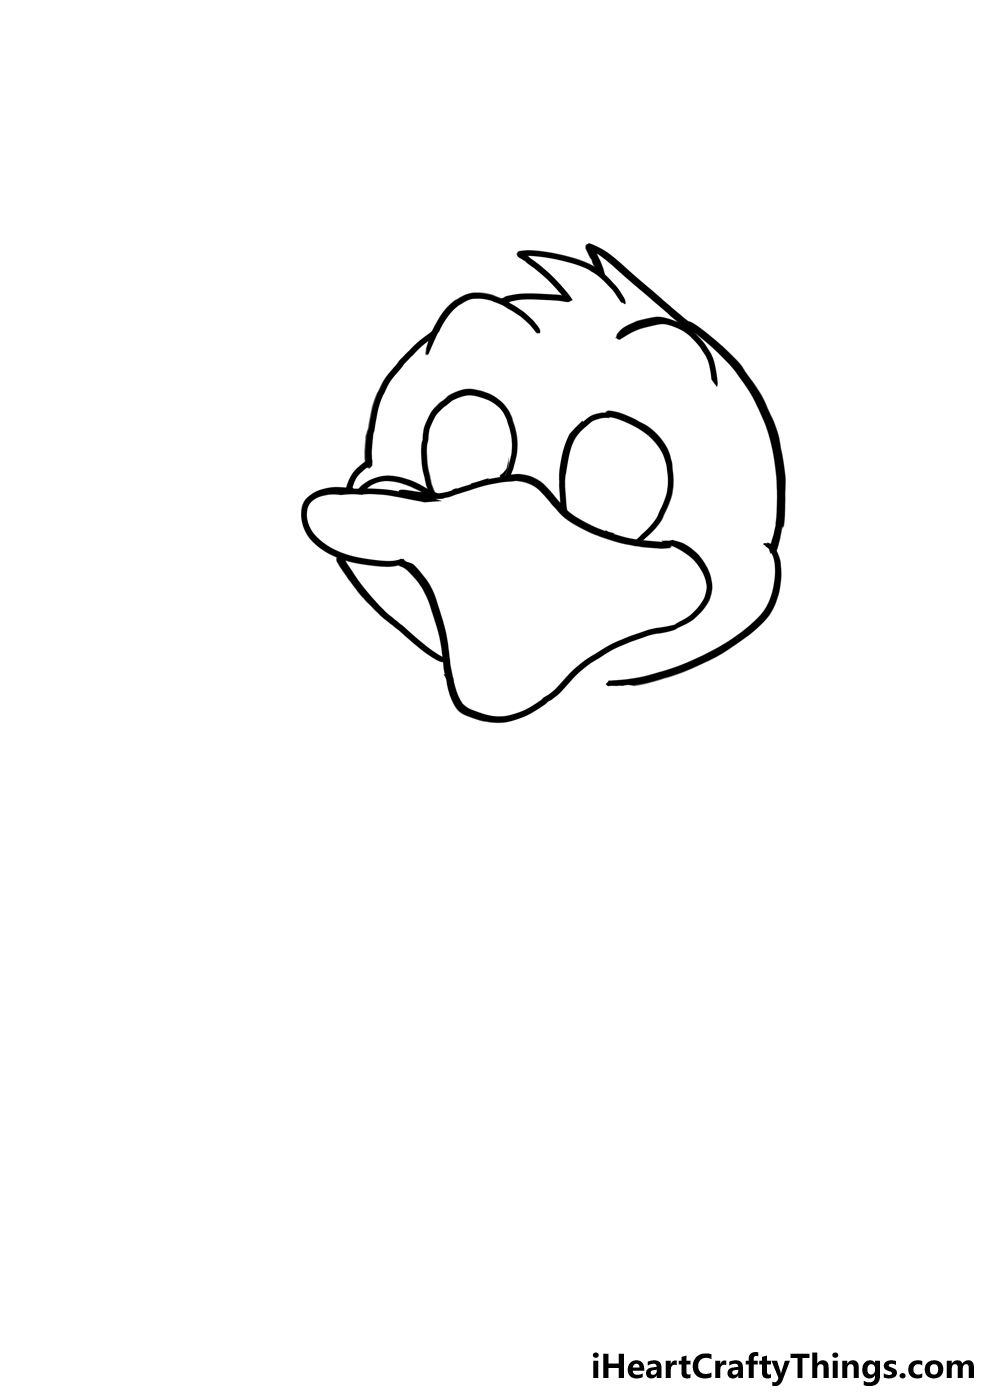 How to Draw A Cartoon Duck step 2